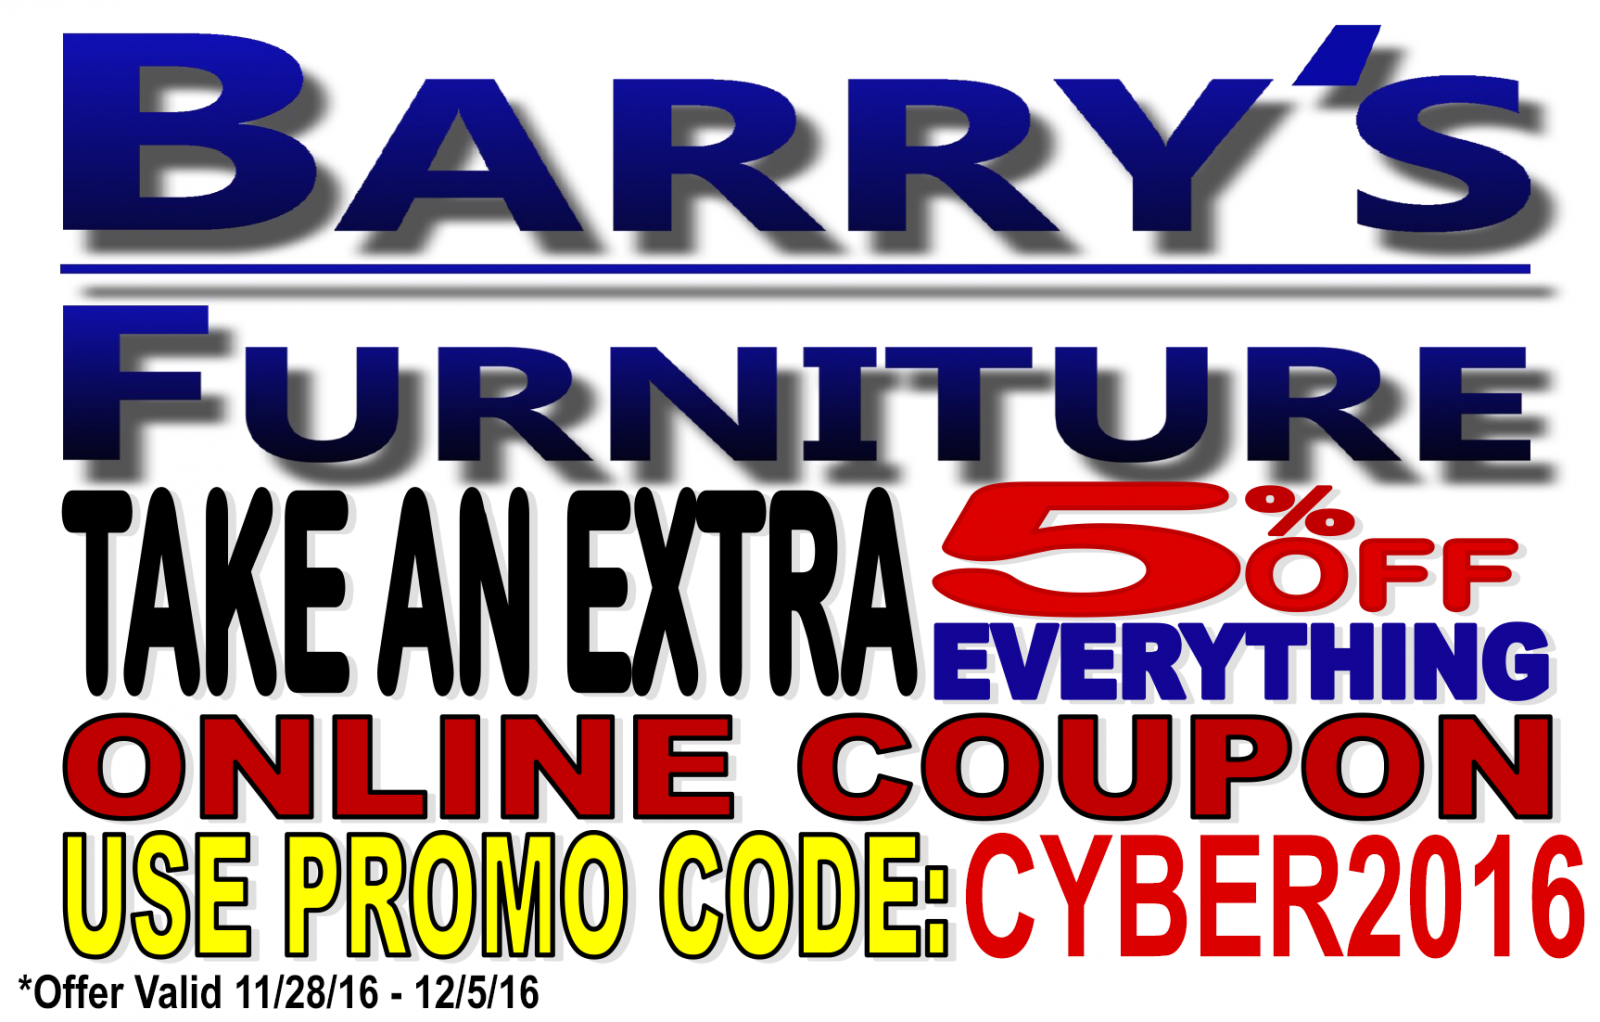 Cyber Monday 5% Off